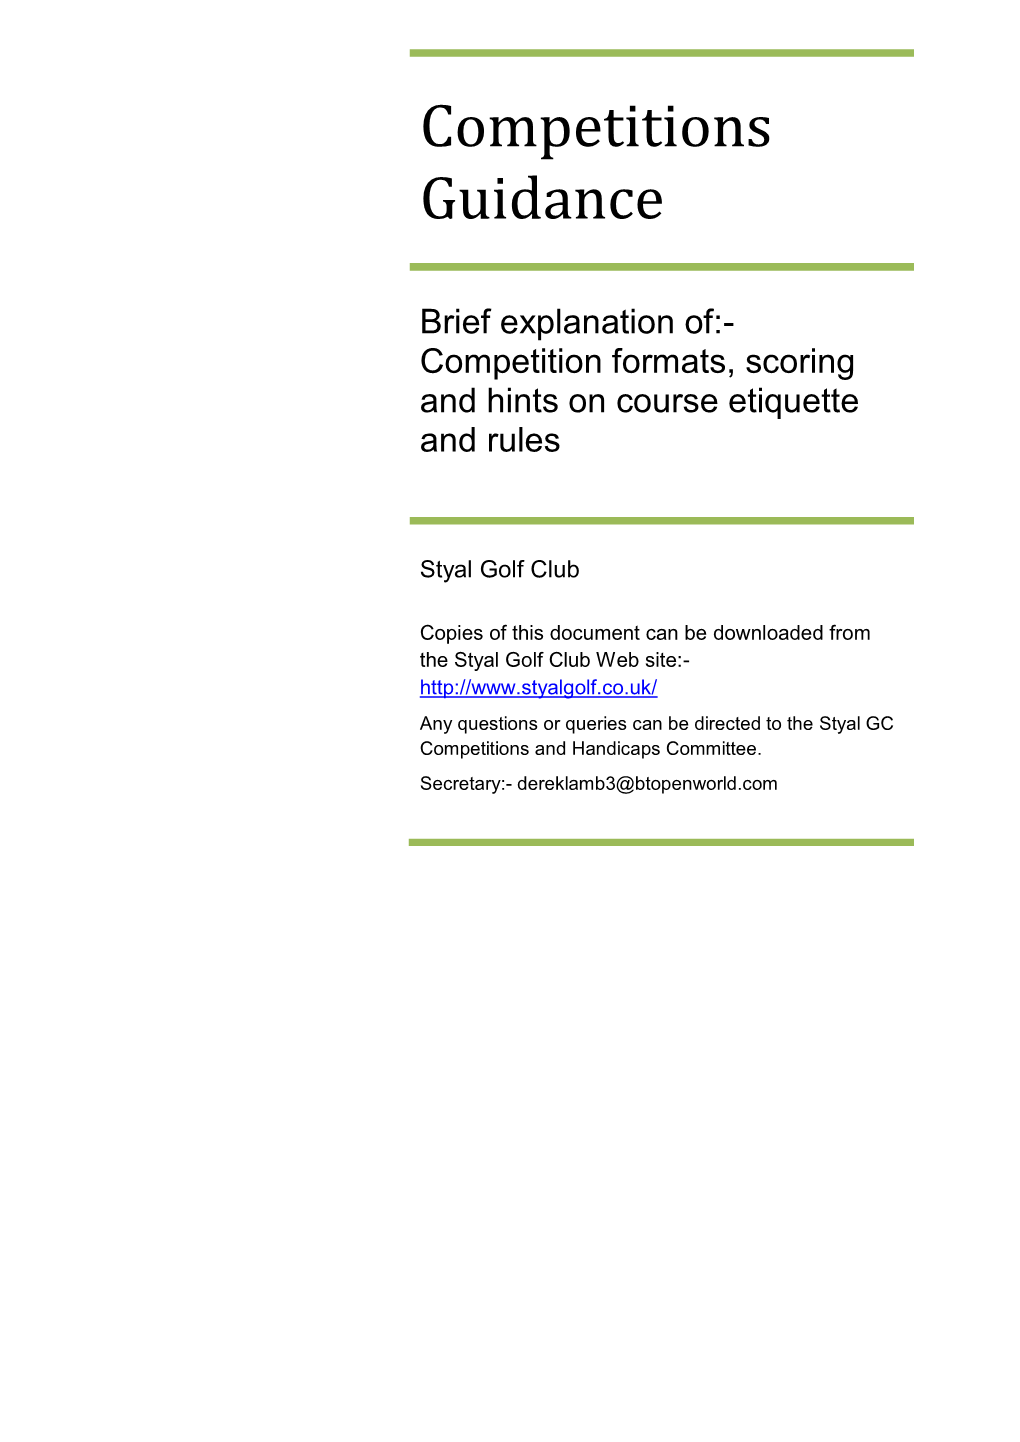 Golf Competitions Guidance